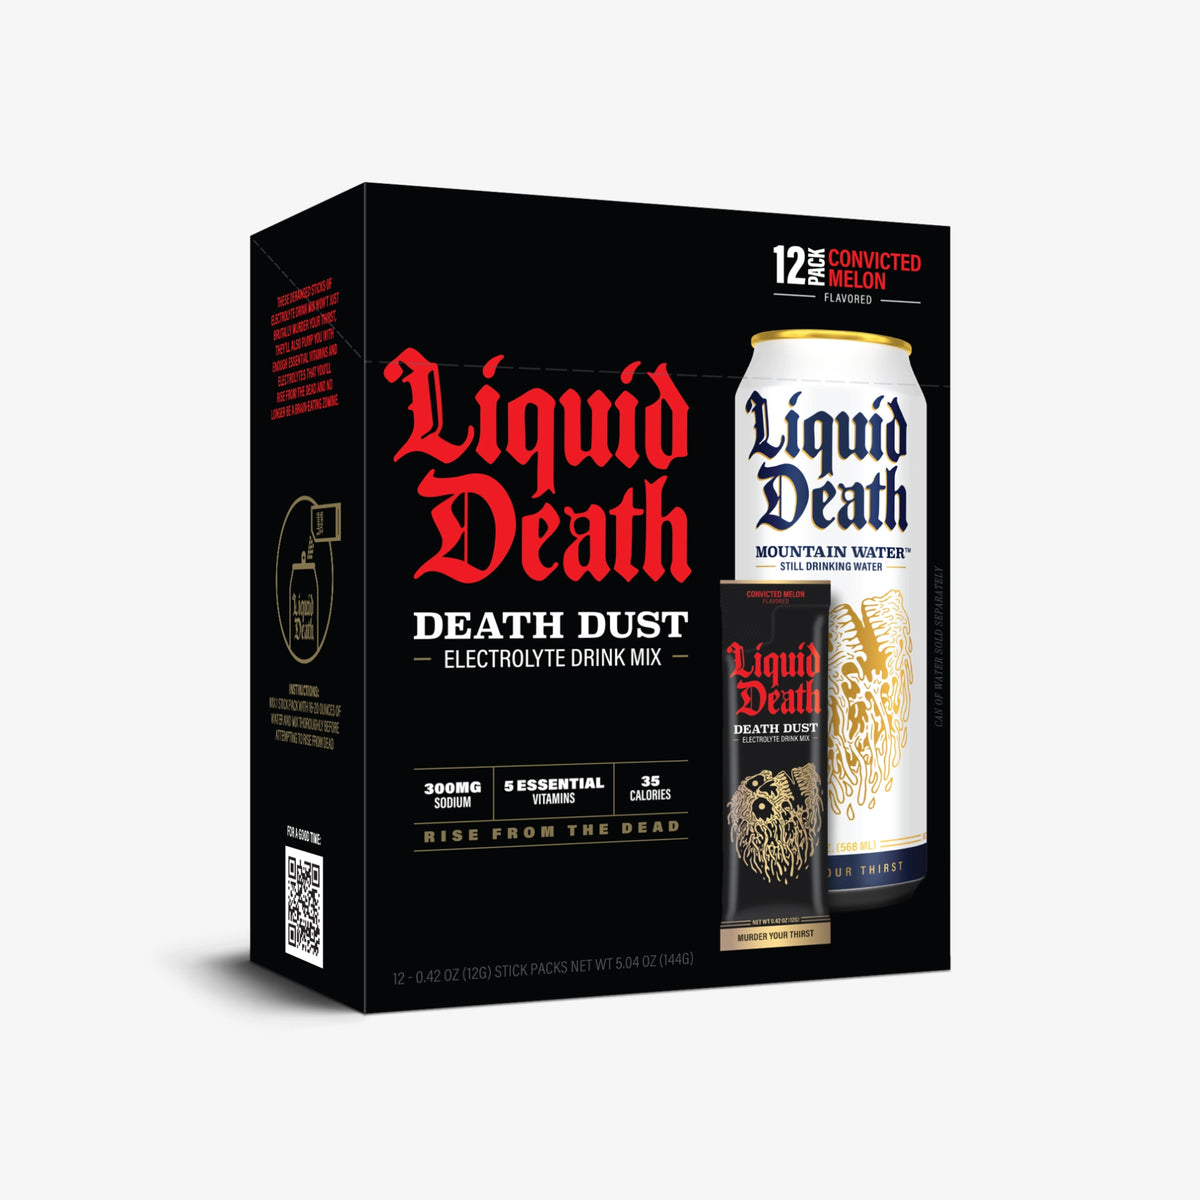 Death Dust Hydration Drink Mix, Convicted Melon (12-pack)